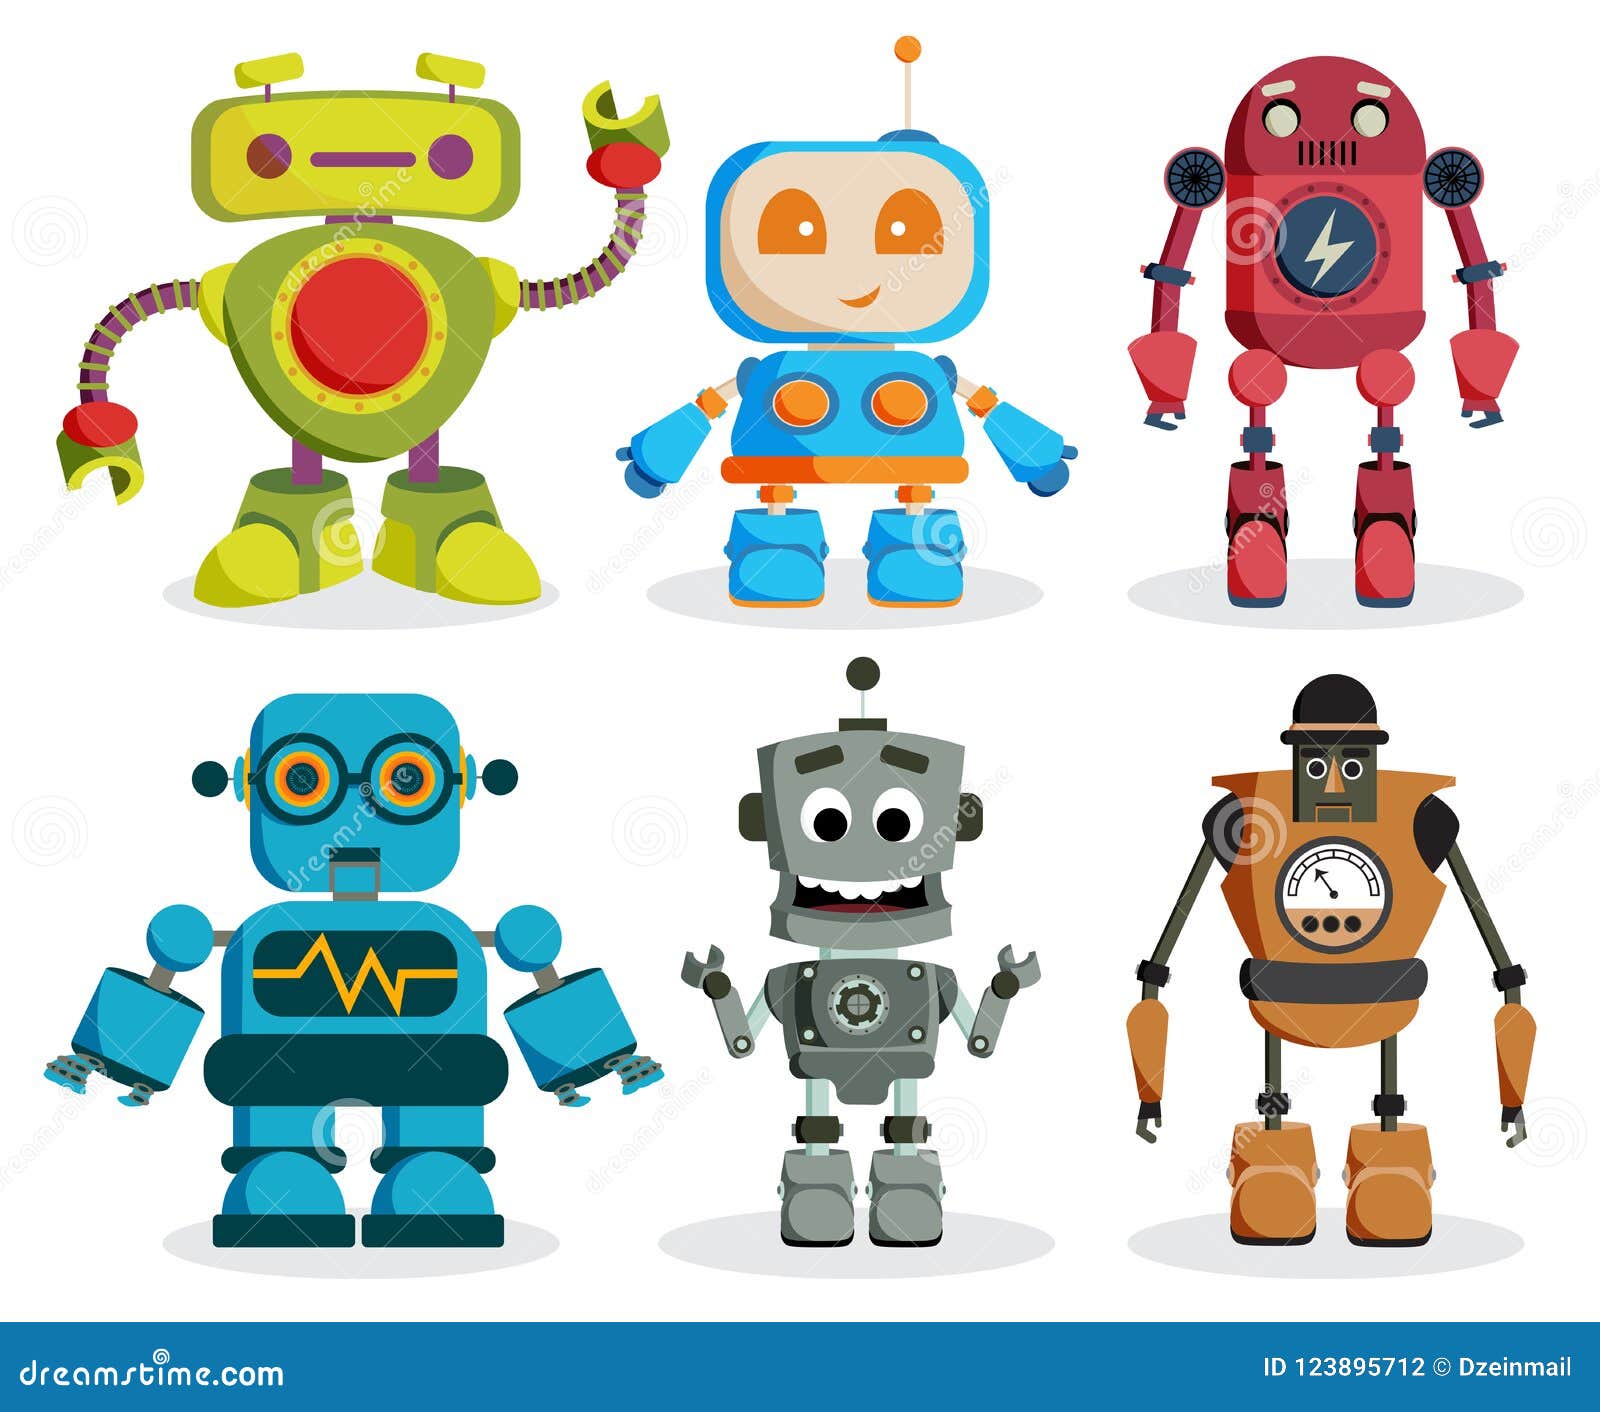 https://thumbs.dreamstime.com/z/robot-toys-vector-characters-set-colorful-kids-robots-elements-friendly-faces-isolated-white-background-illustration-123895712.jpg